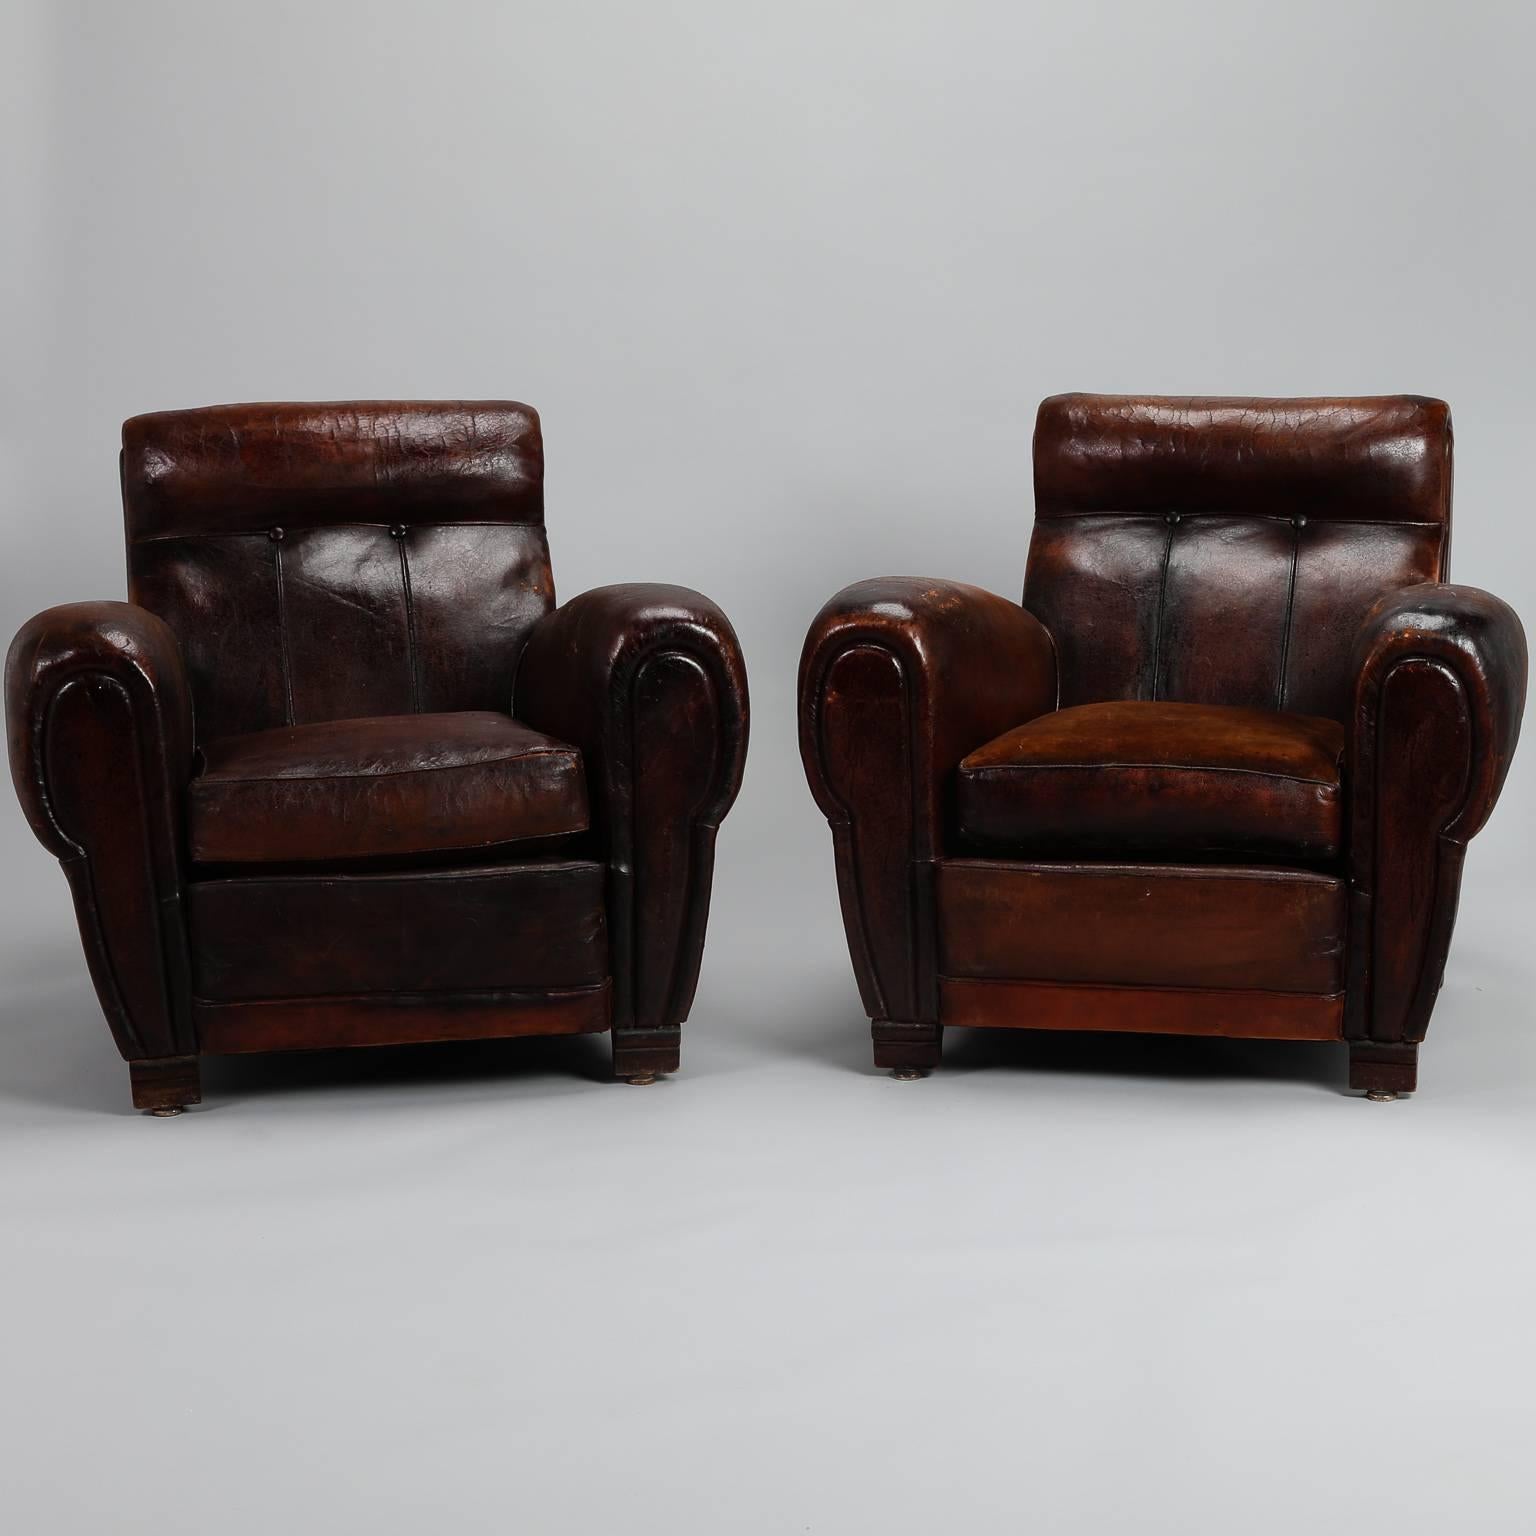 Pair of French club chairs in original dark brown leather, circa 1930s. Traditional, curvy form with button tufted angled seat backs, rolled arms and cushions with leather on one side and velvet on the other, decorative brass nailhead